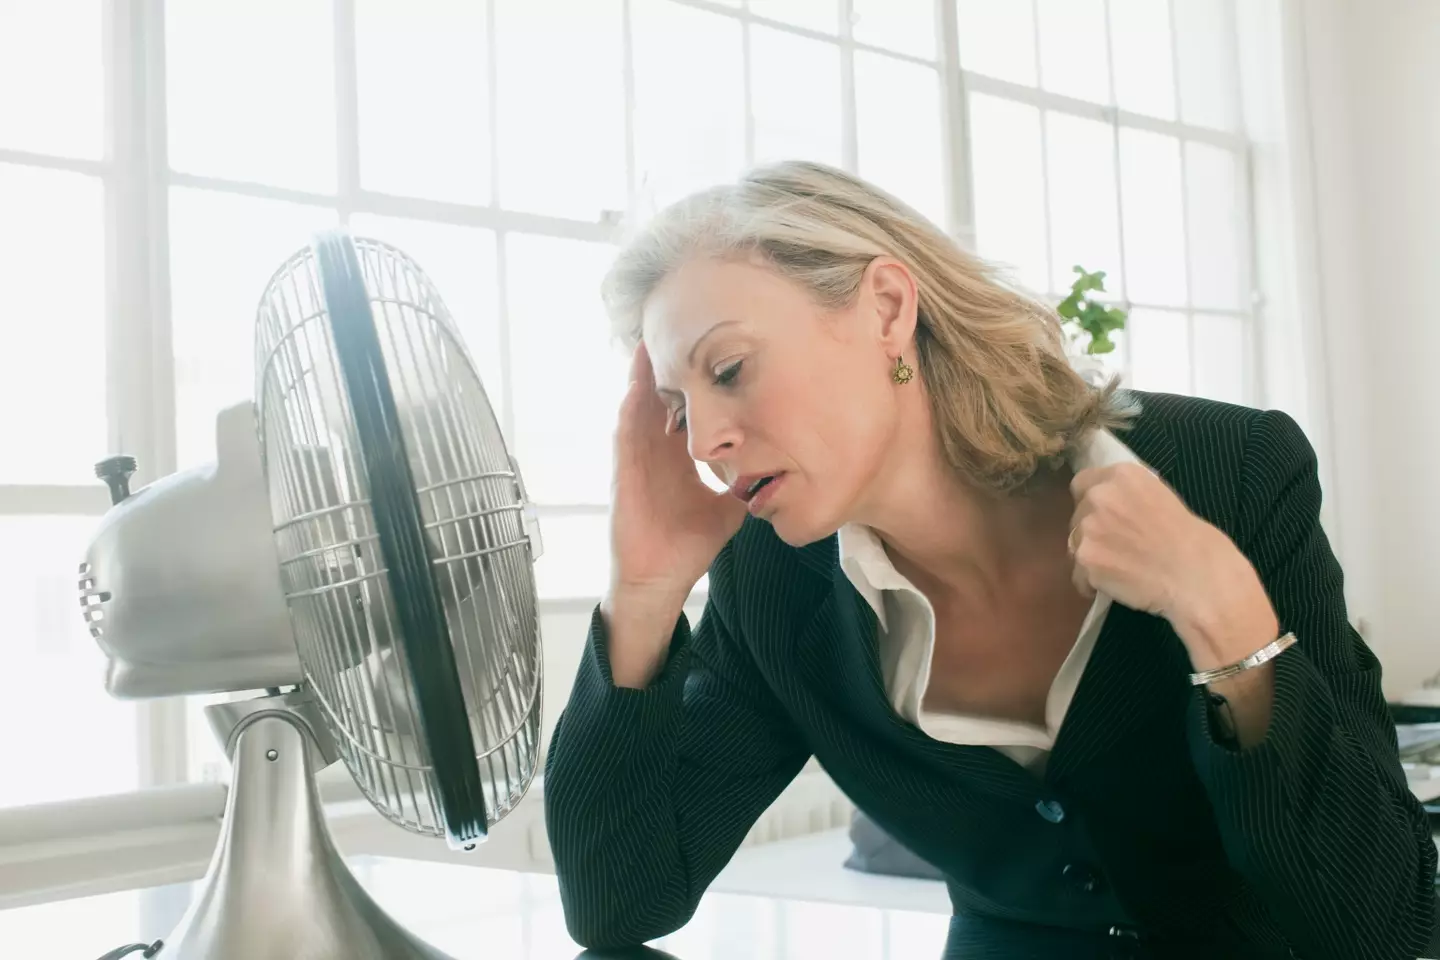 UK workers have wondered if there's a legal maximum office temperature. (Sean De Burca/Getty)